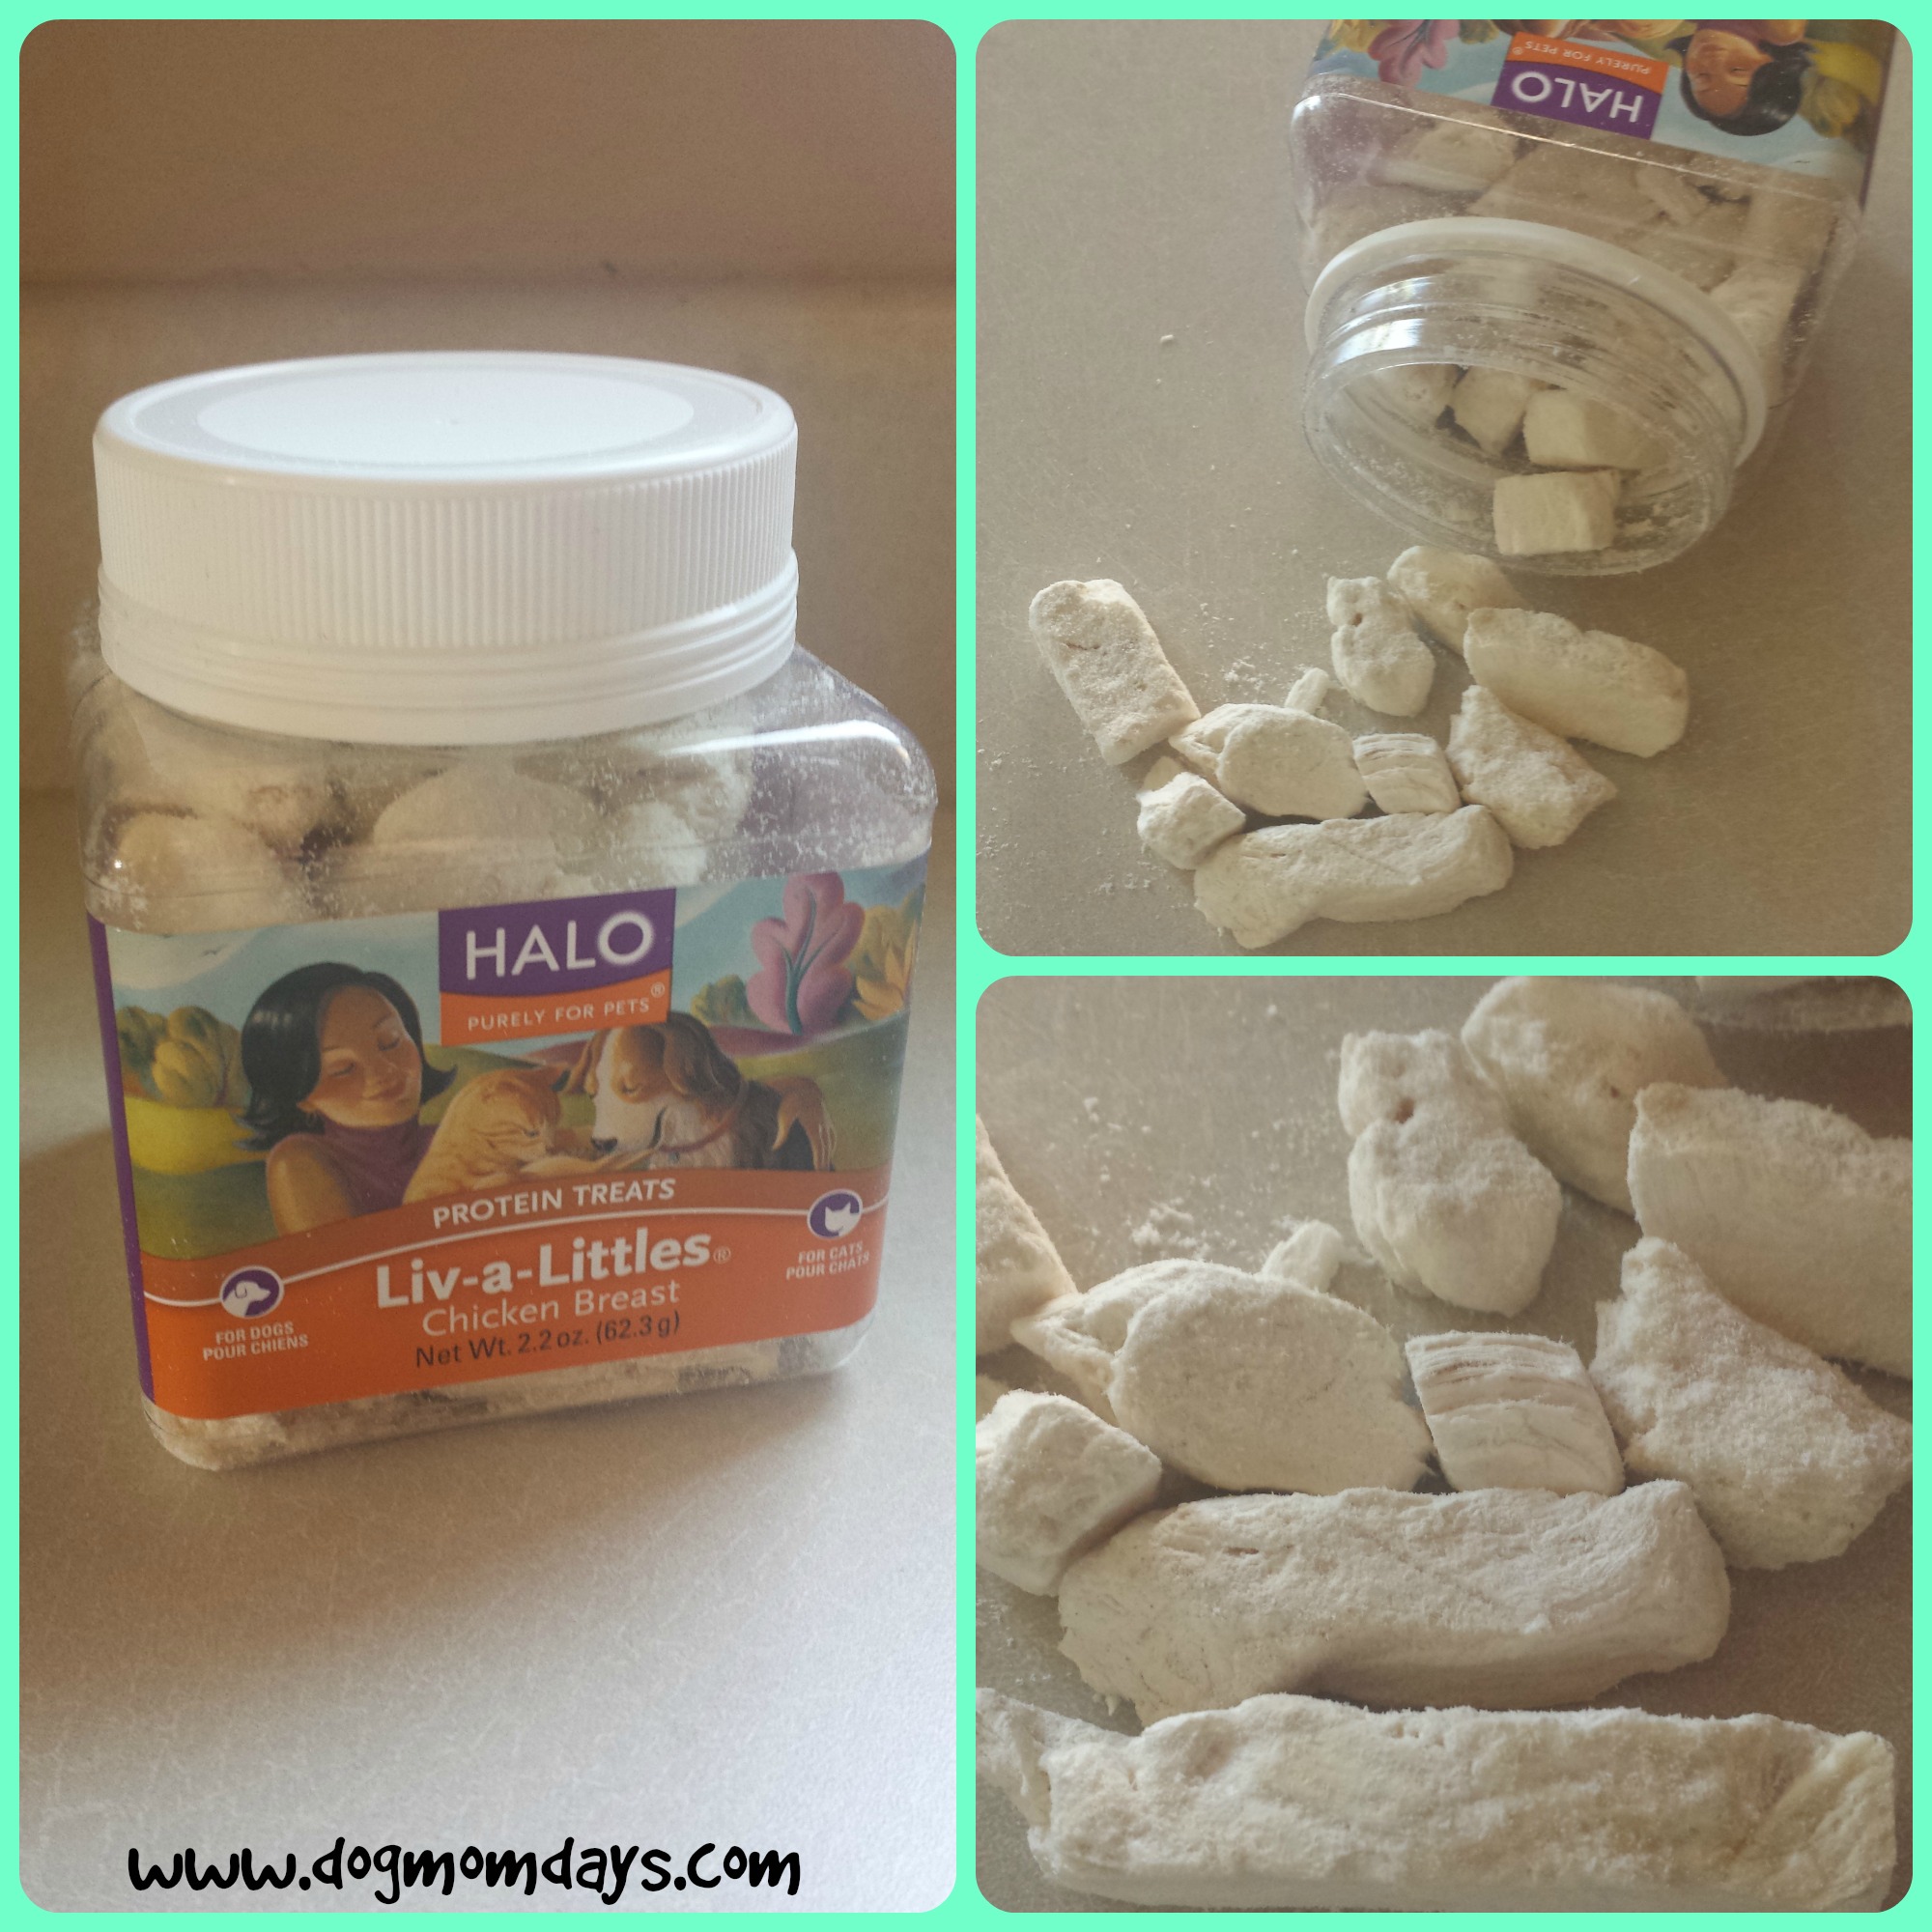 Halo, Purely for Pets Liv-a-littles chicken breast protein treats. 